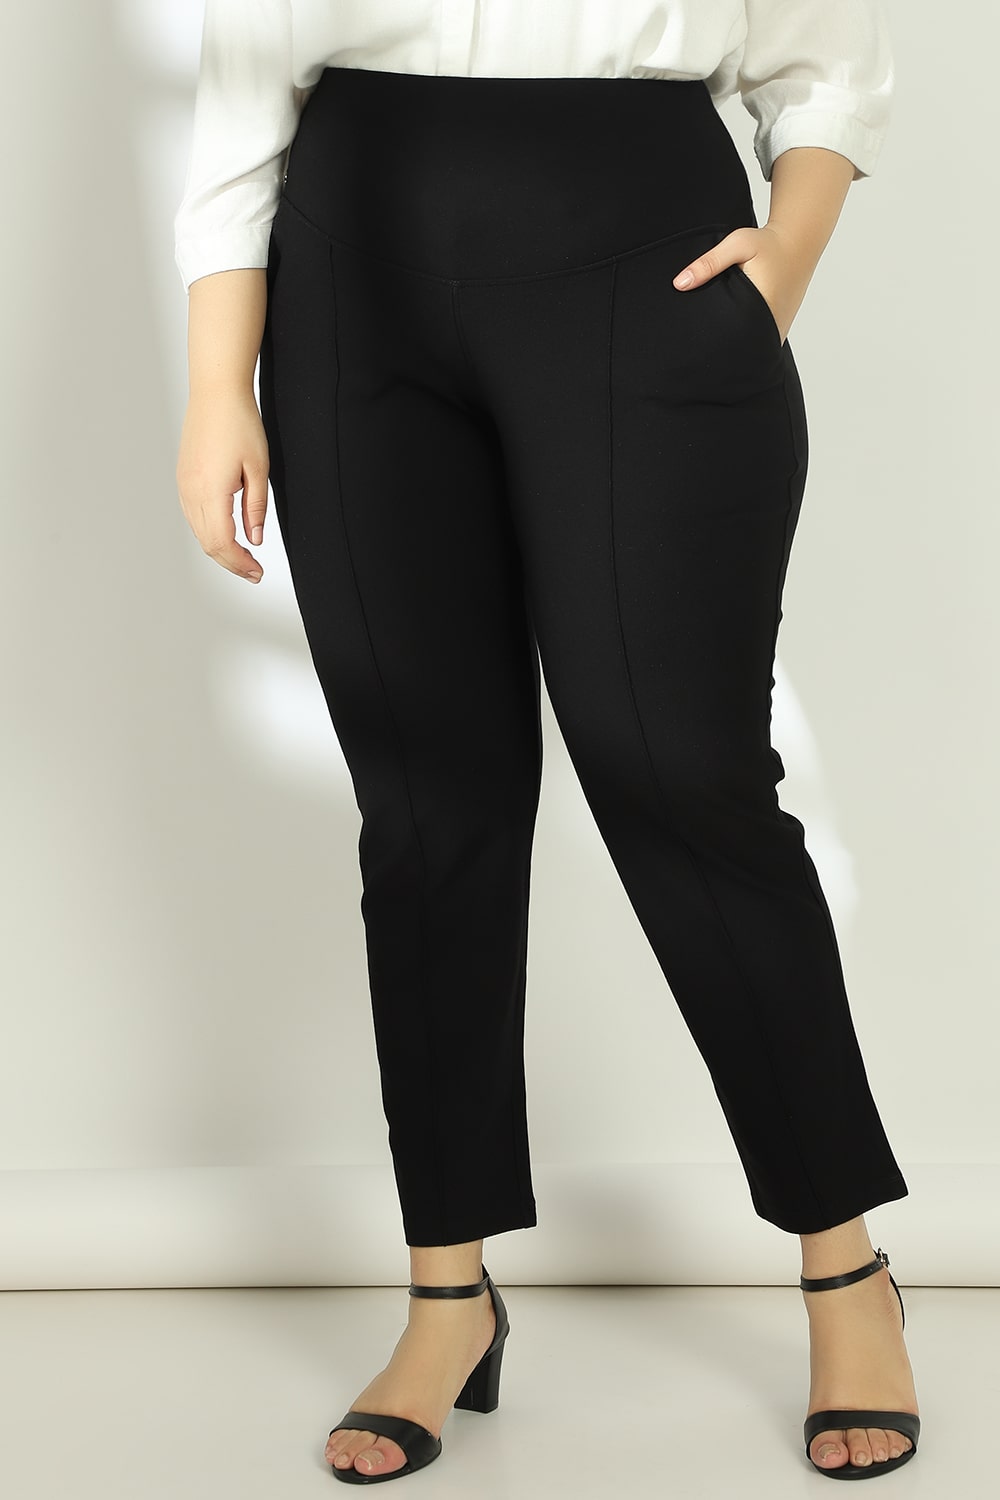 Buy Ruby Rd Womens PlusSize Plus Flat Front Easy Stretch Pant Black  16W at Amazonin